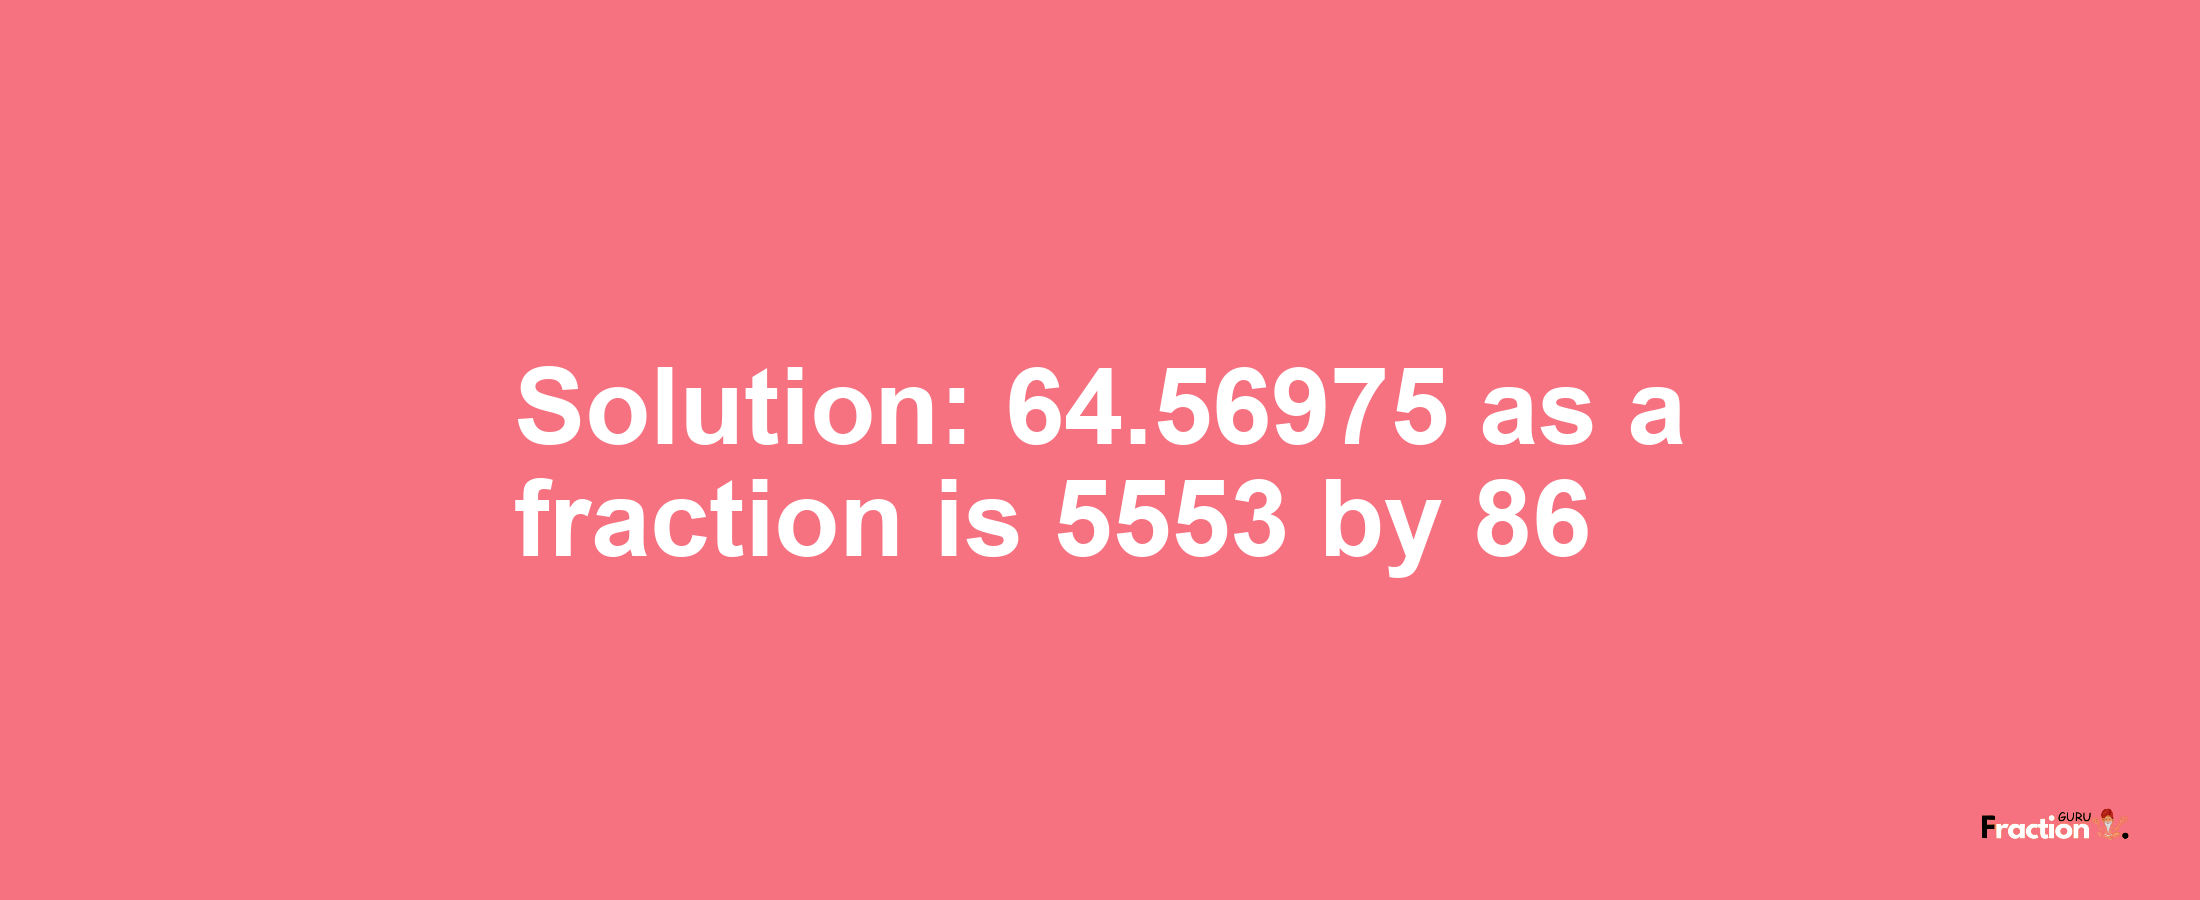 Solution:64.56975 as a fraction is 5553/86